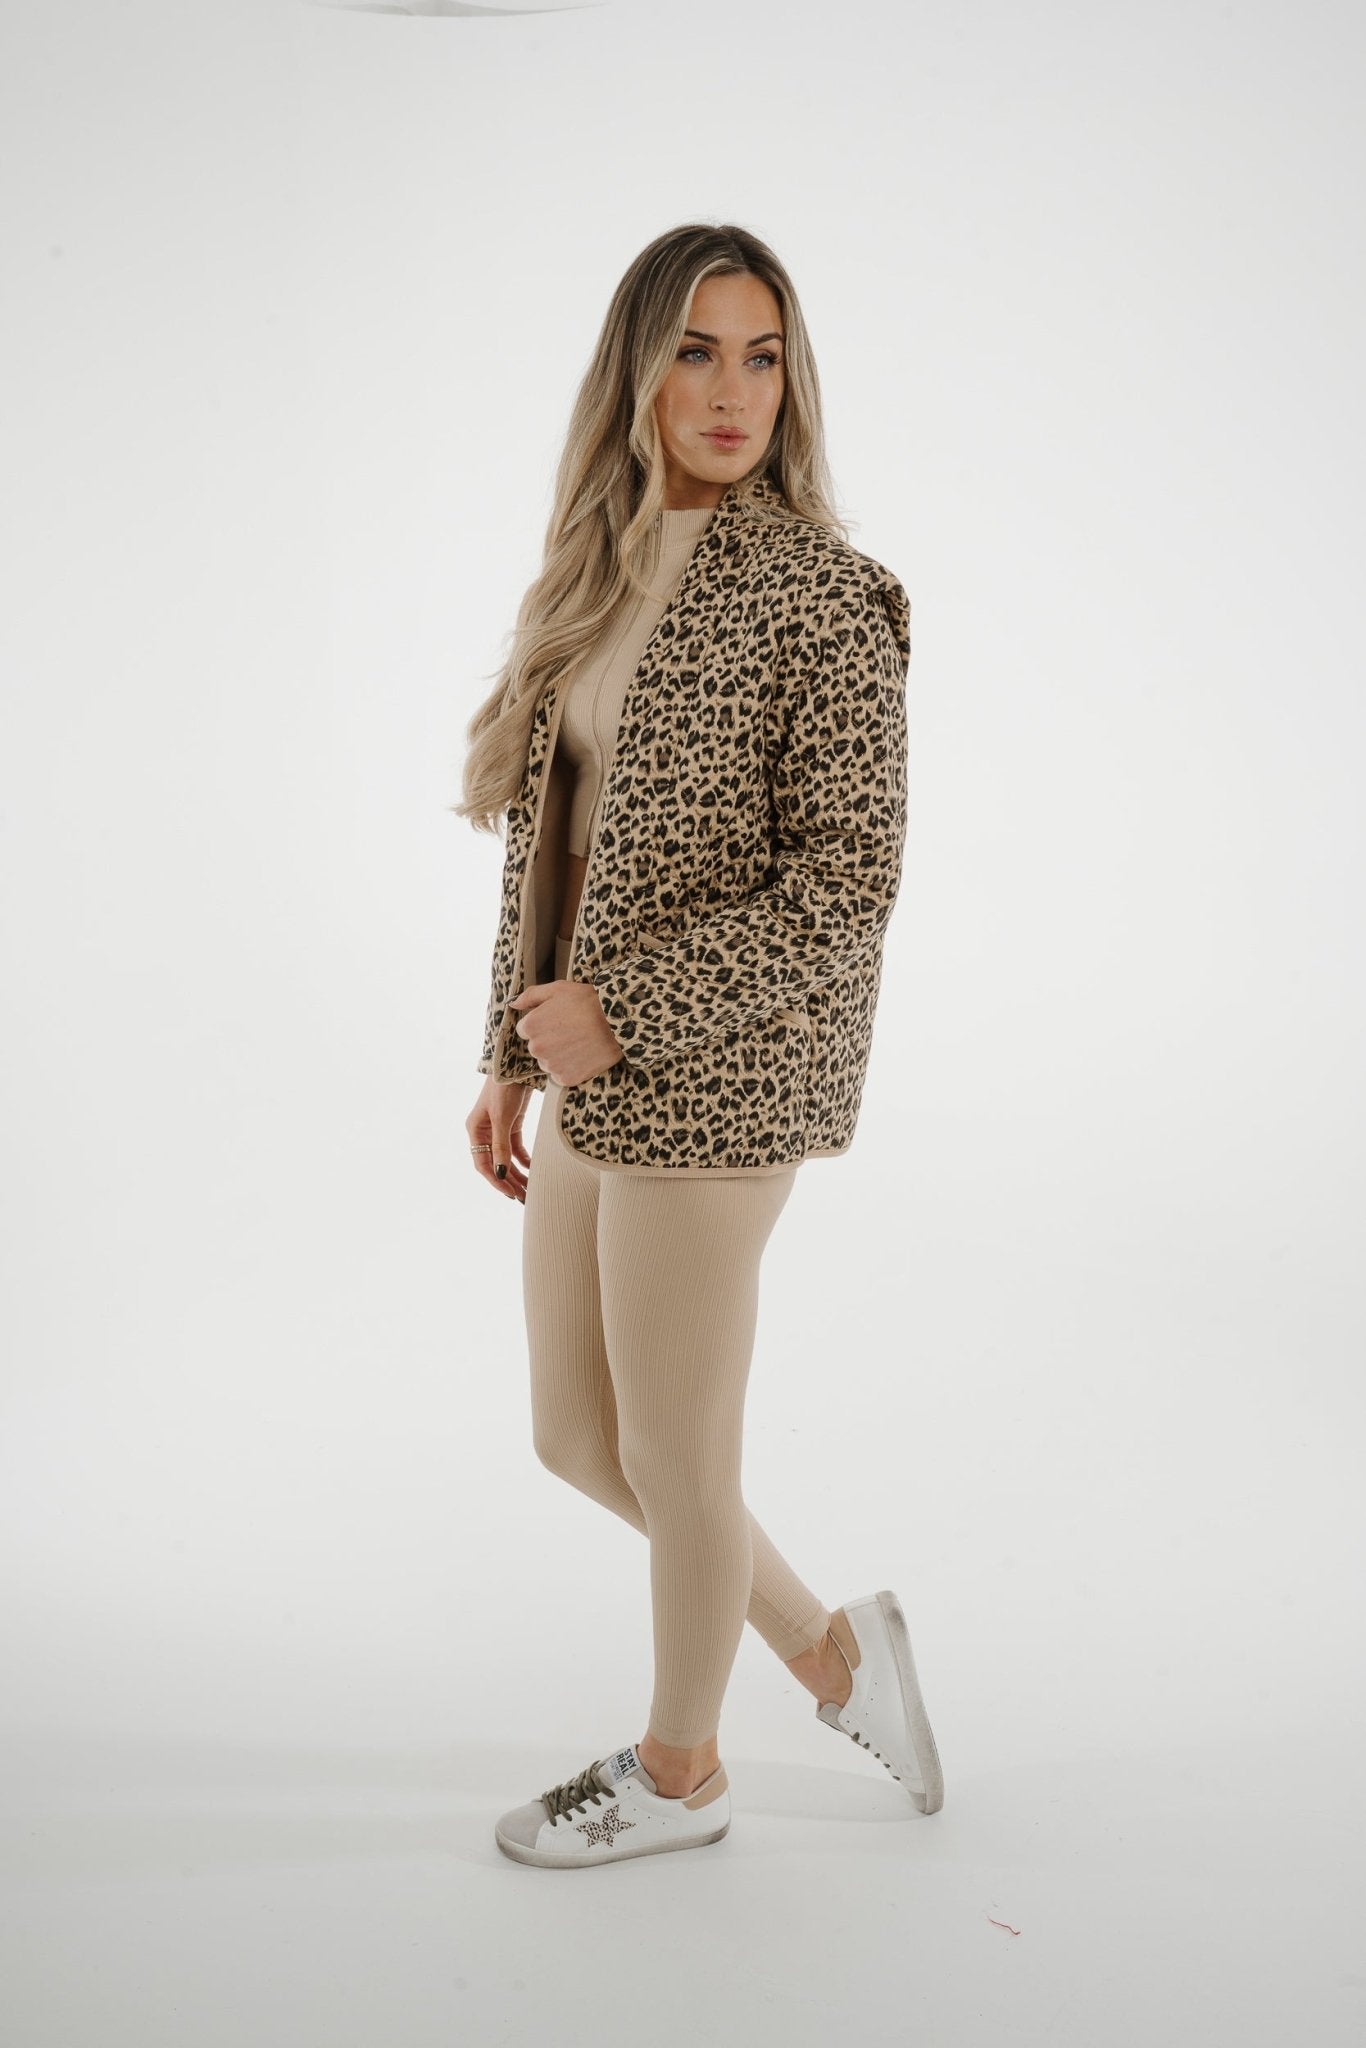 Cora Quilted Jacket In Leopard Print - The Walk in Wardrobe